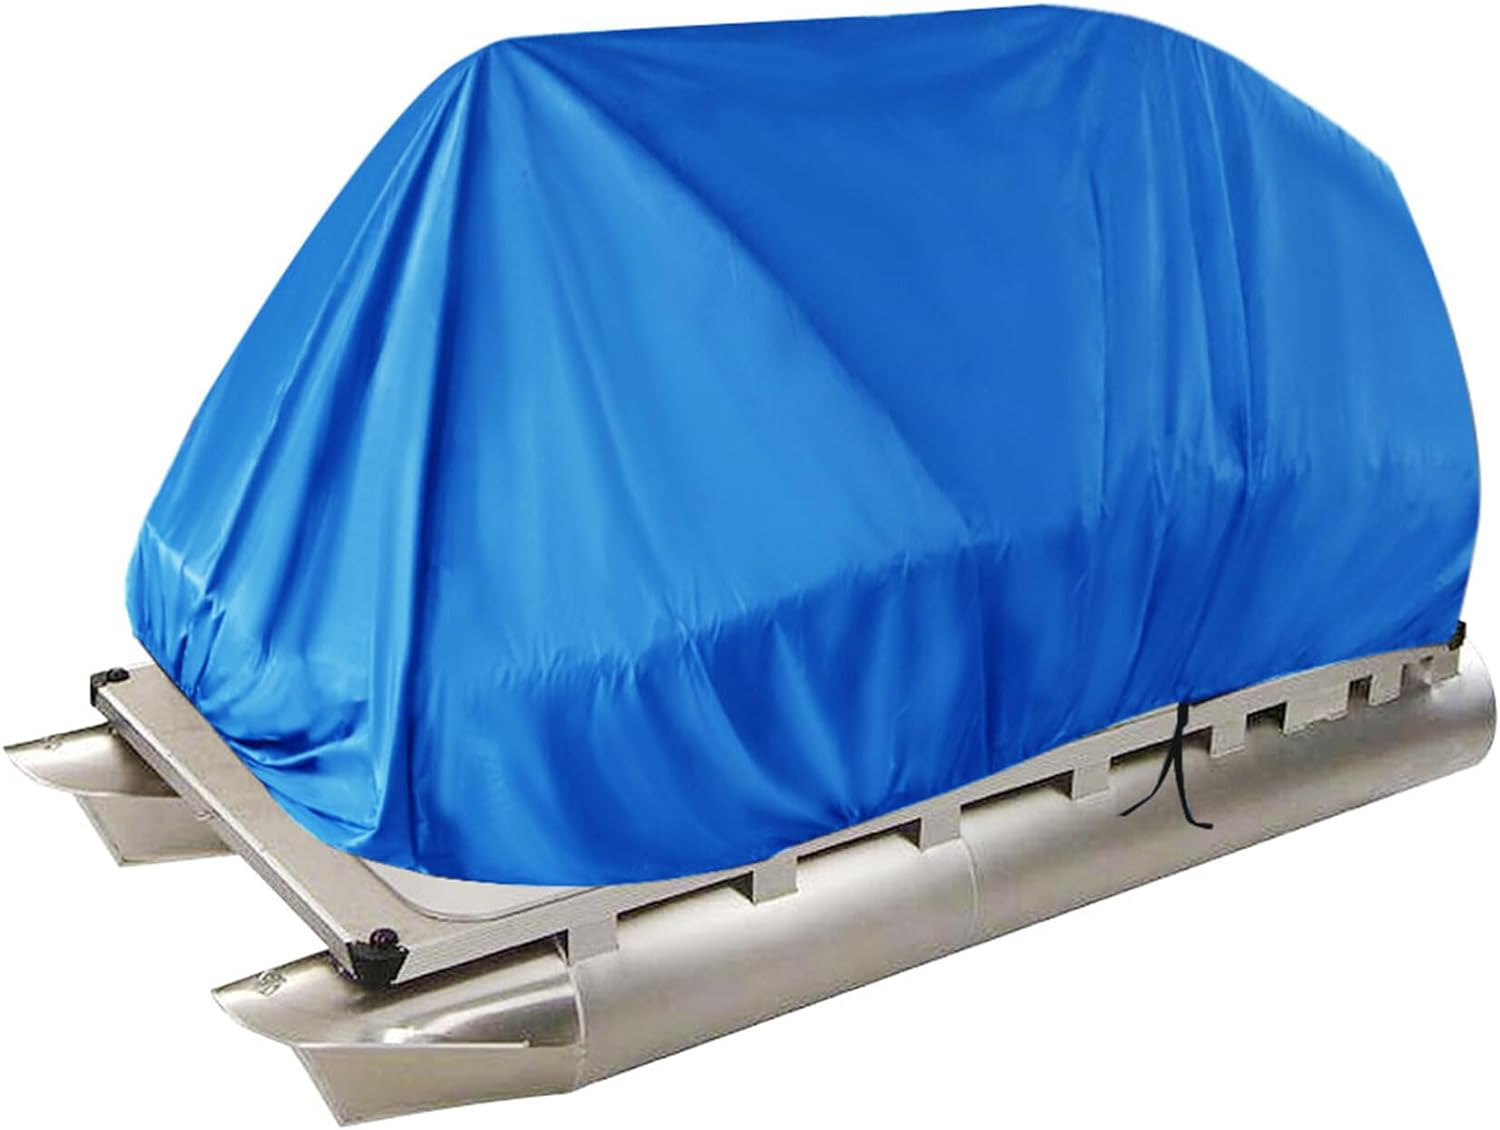 17-20Ft Boat Cover Dark Blue Heavy Duty with Support Pole Replacement for Rain S